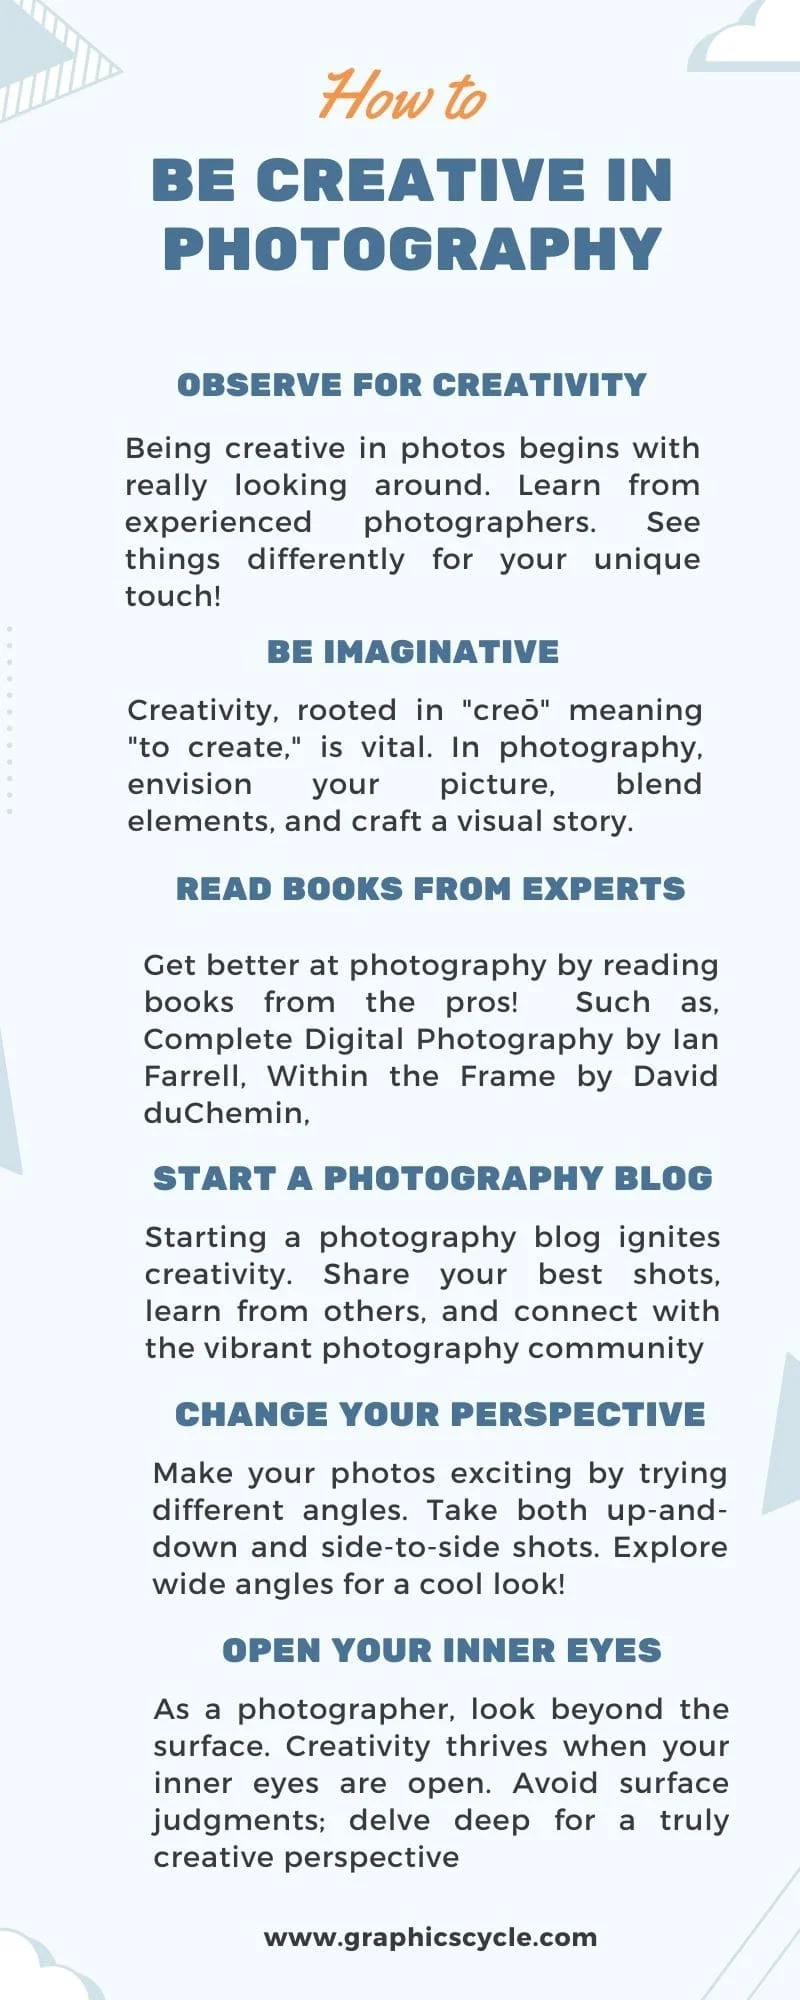 How to Be Creative in Photography